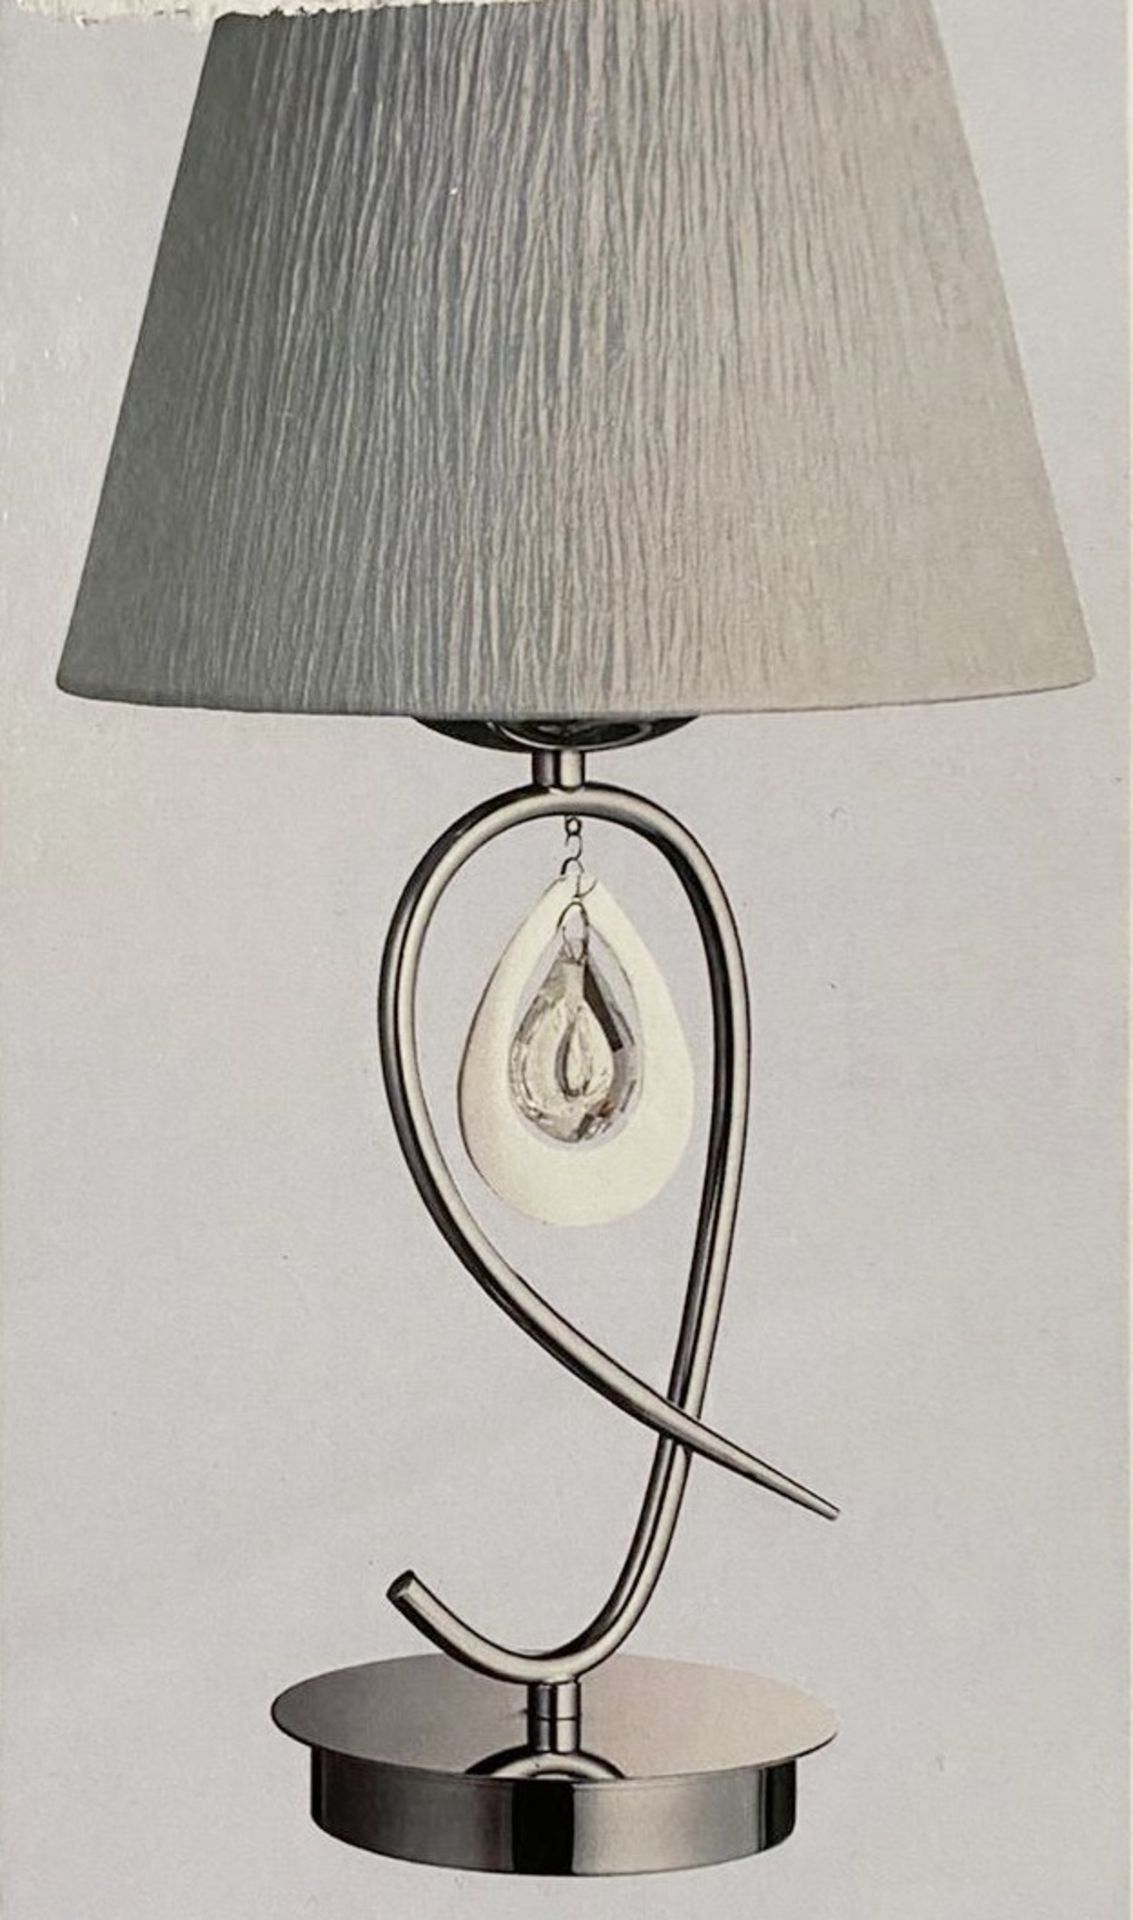 1 x Searchlight Table Lamp in chrome - Ref: 2021CC - New and Boxed - RRP £80